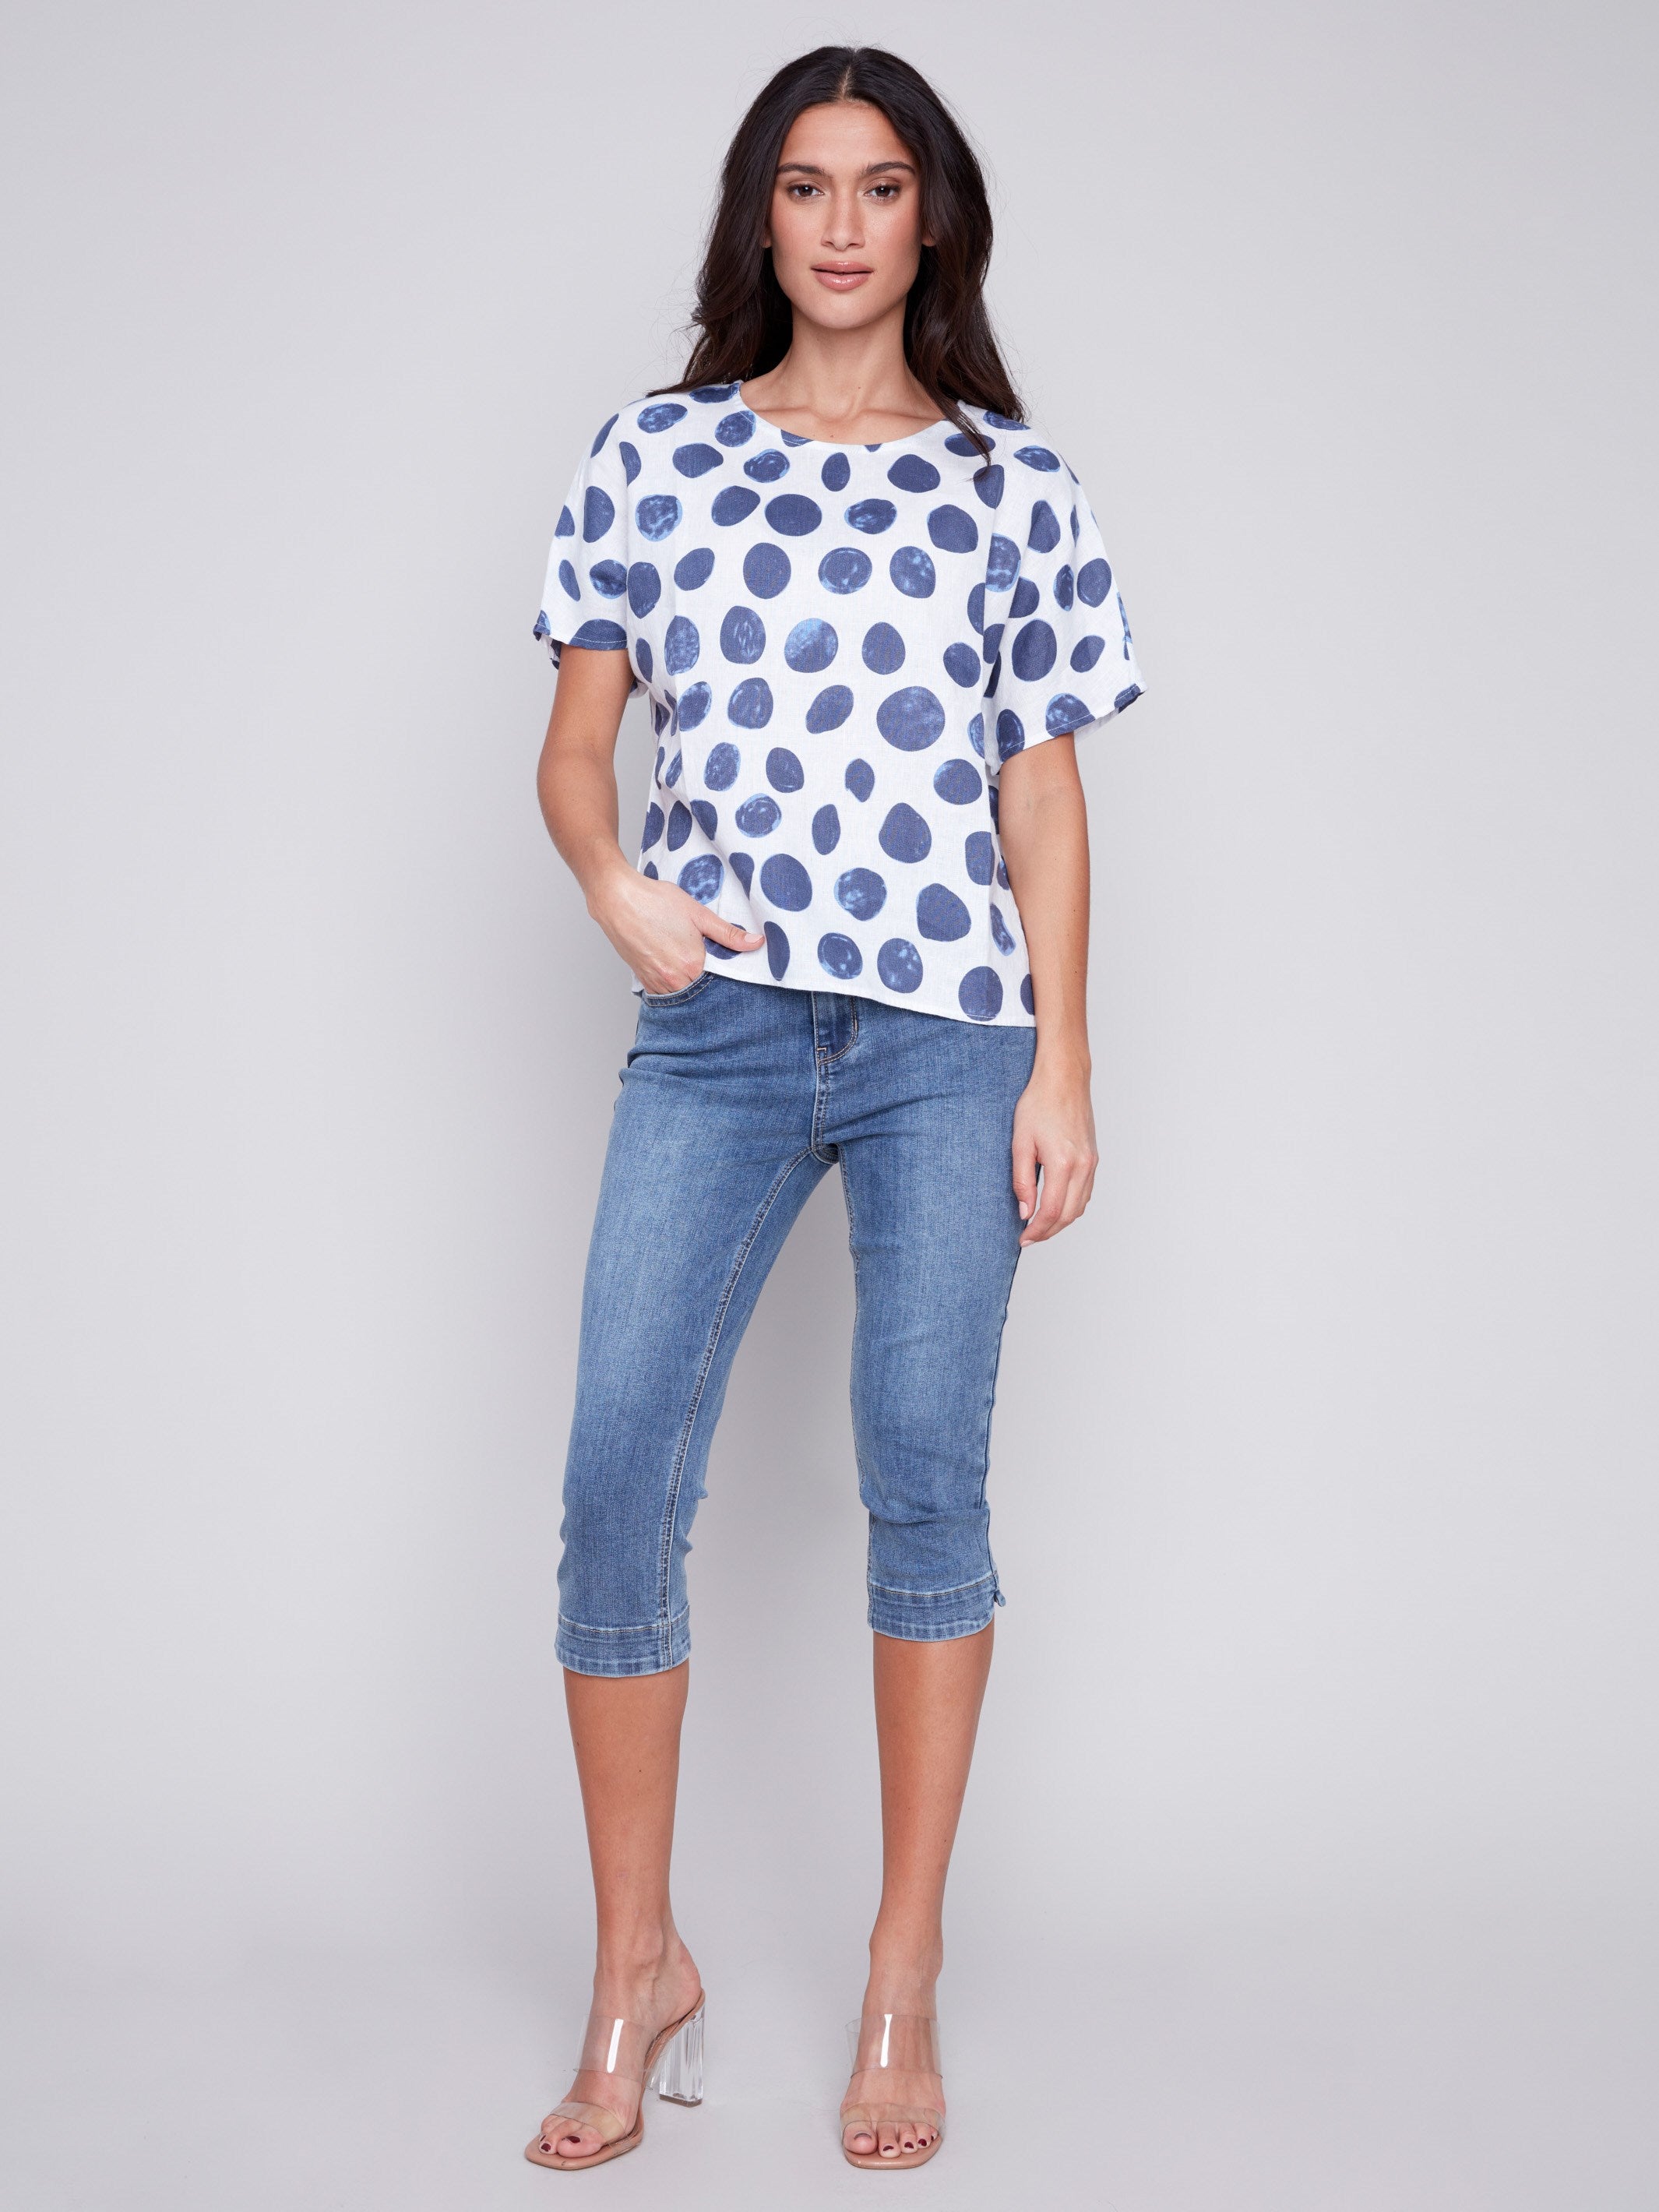 Printed Linen Dolman Top - Dots - Charlie B Collection Canada - Image 3